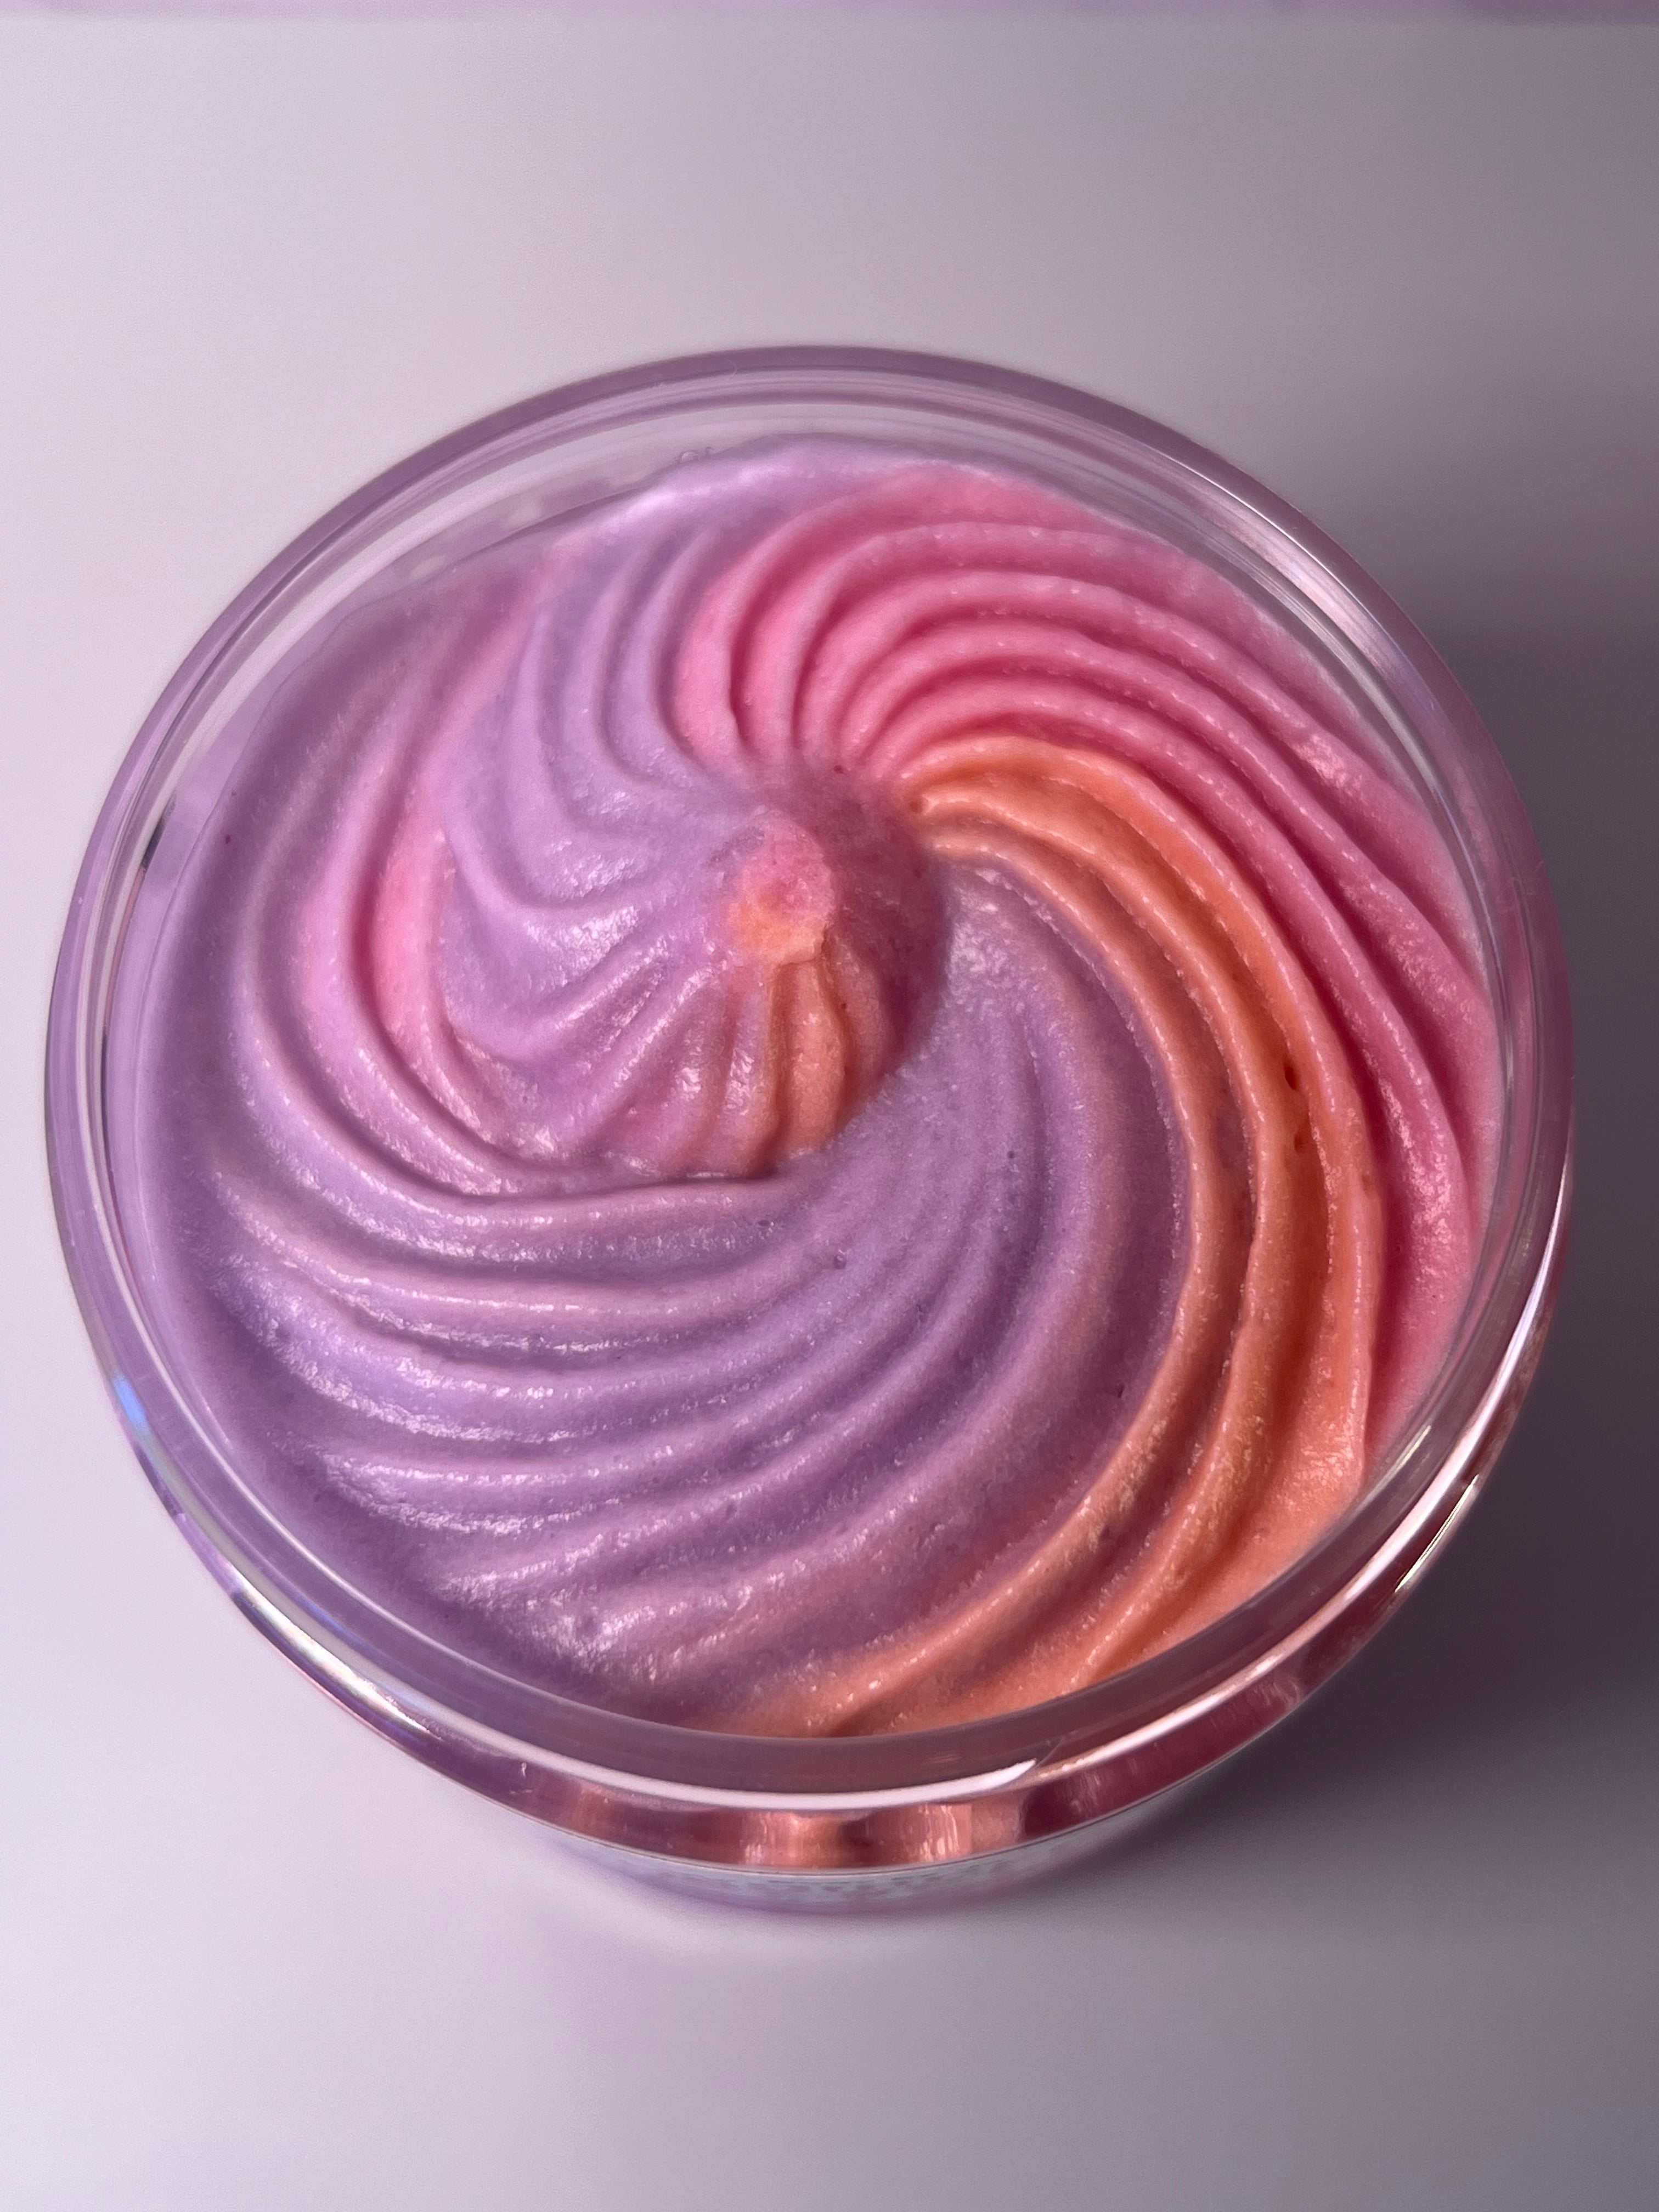 Twisted Sunset Body Butter